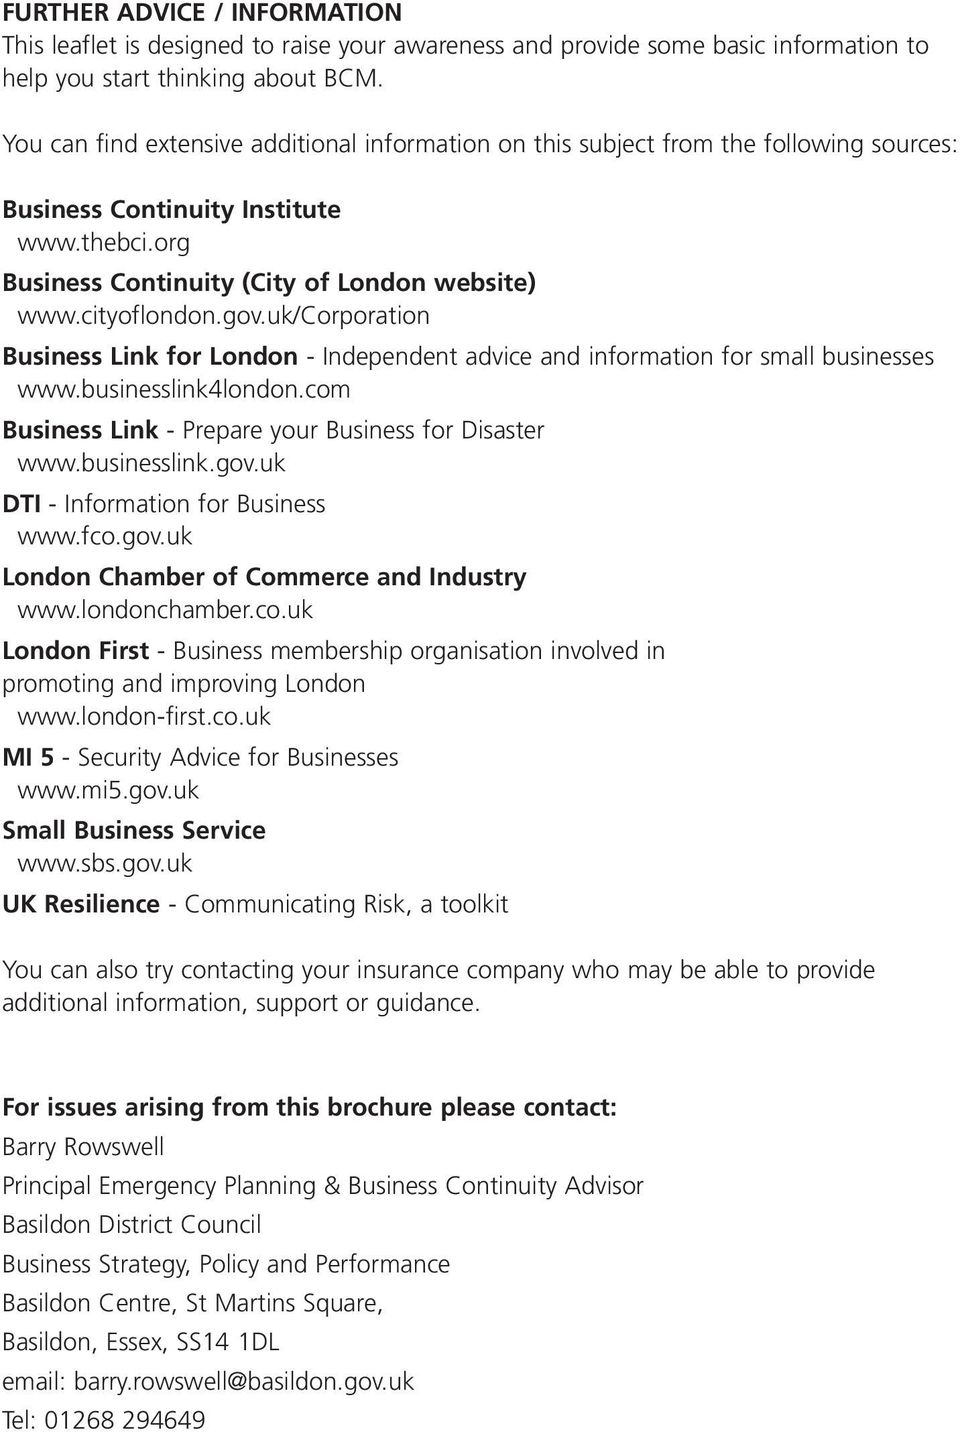 gov.uk/corporation Business Link for London - Independent advice and information for small businesses www.businesslink4london.com Business Link - Prepare your Business for Disaster www.businesslink.gov.uk DTI - Information for Business www.